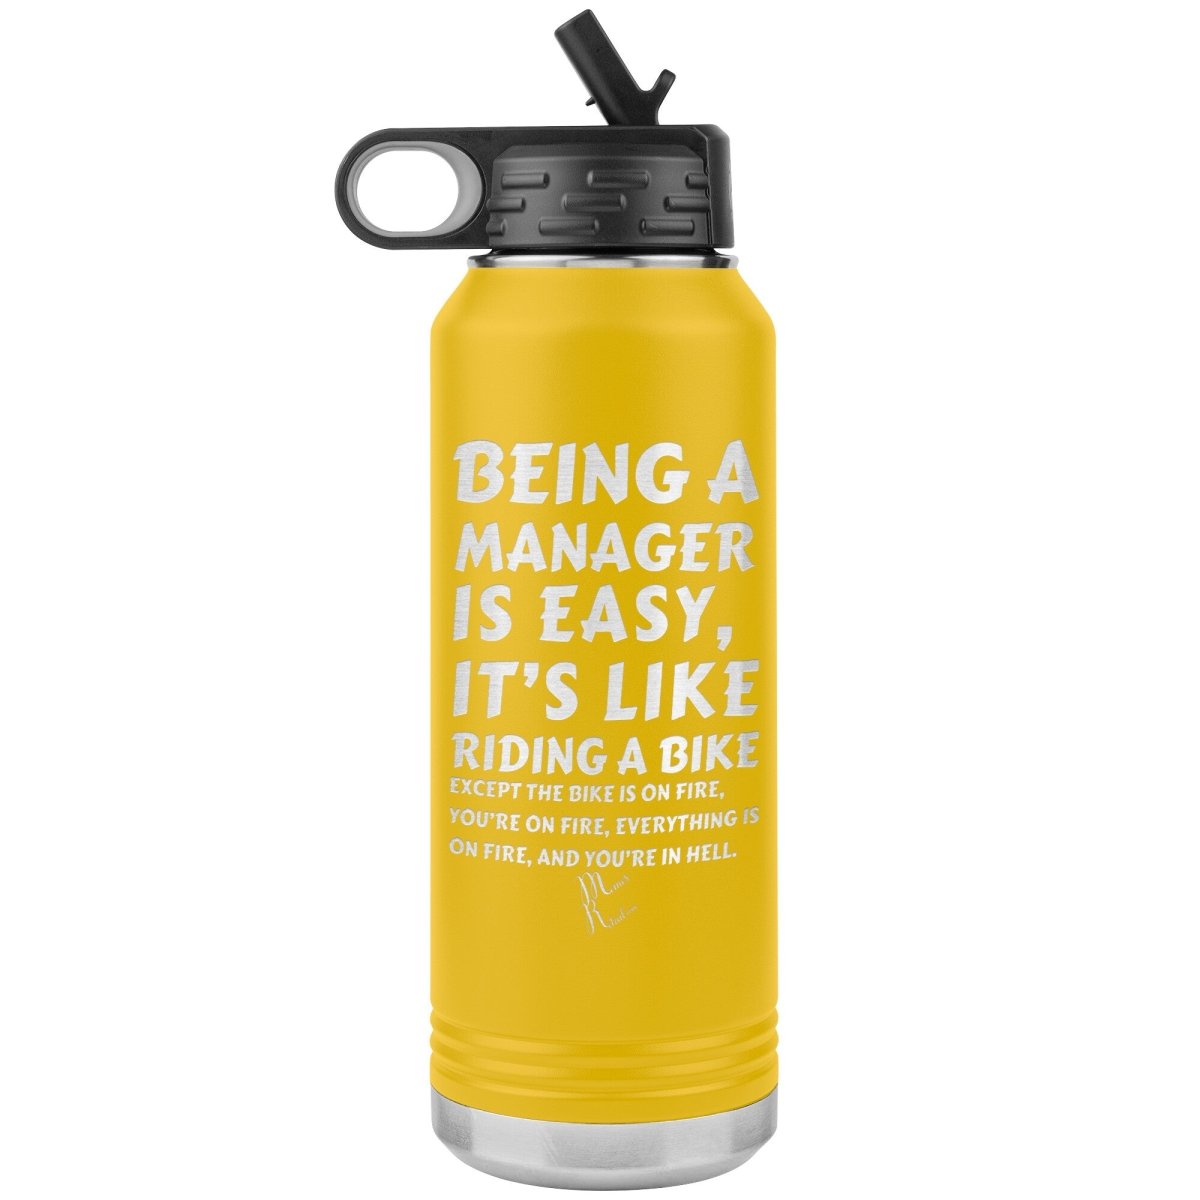 Being a manager is easy….32oz Water Tumbler, Yellow - MemesRetail.com